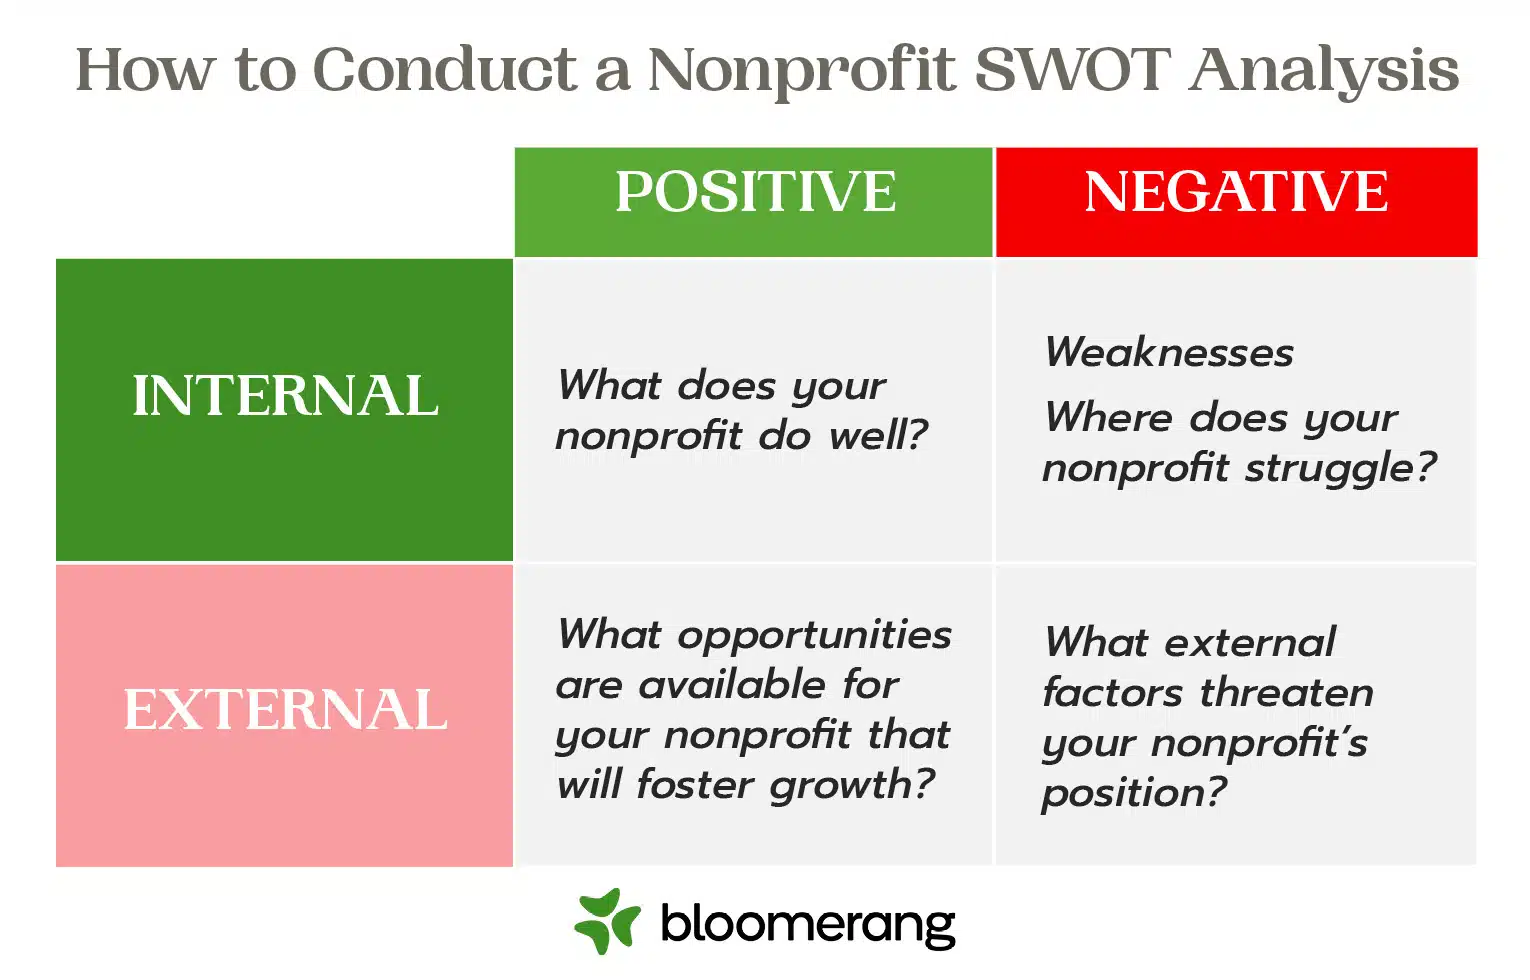 This image shows a breakdown of a nonprofit SWOT analysis, which you can use during your strategic planning process. 